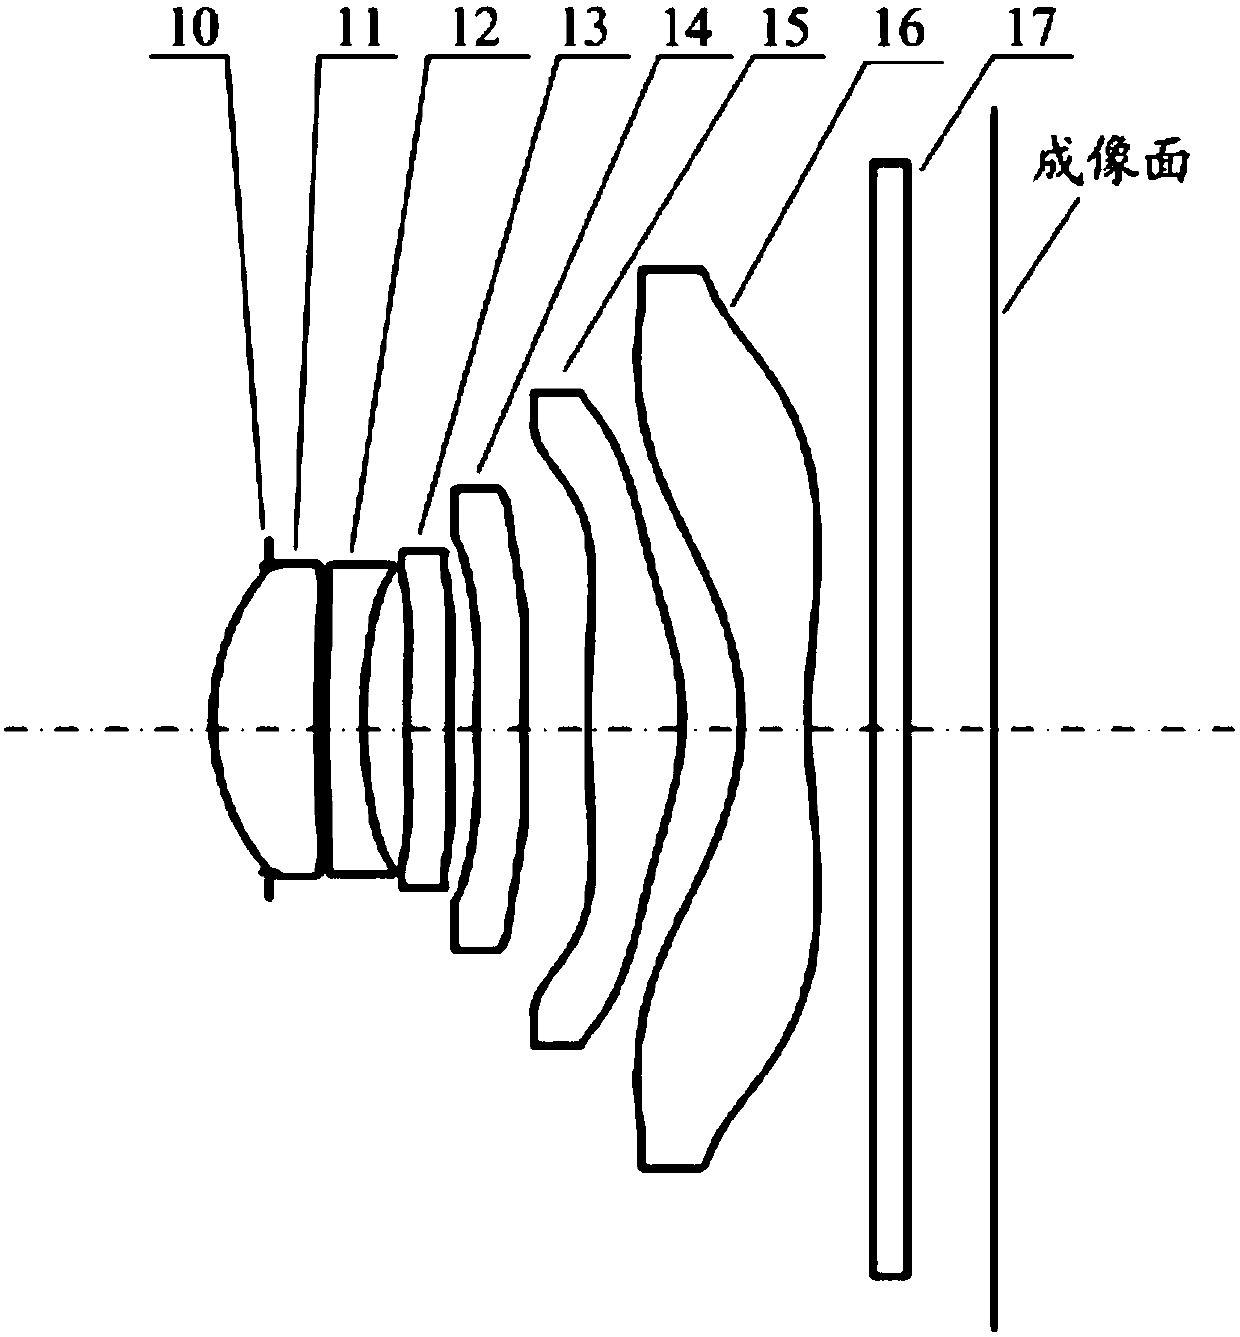 Optical imaging lens and photographing equipment